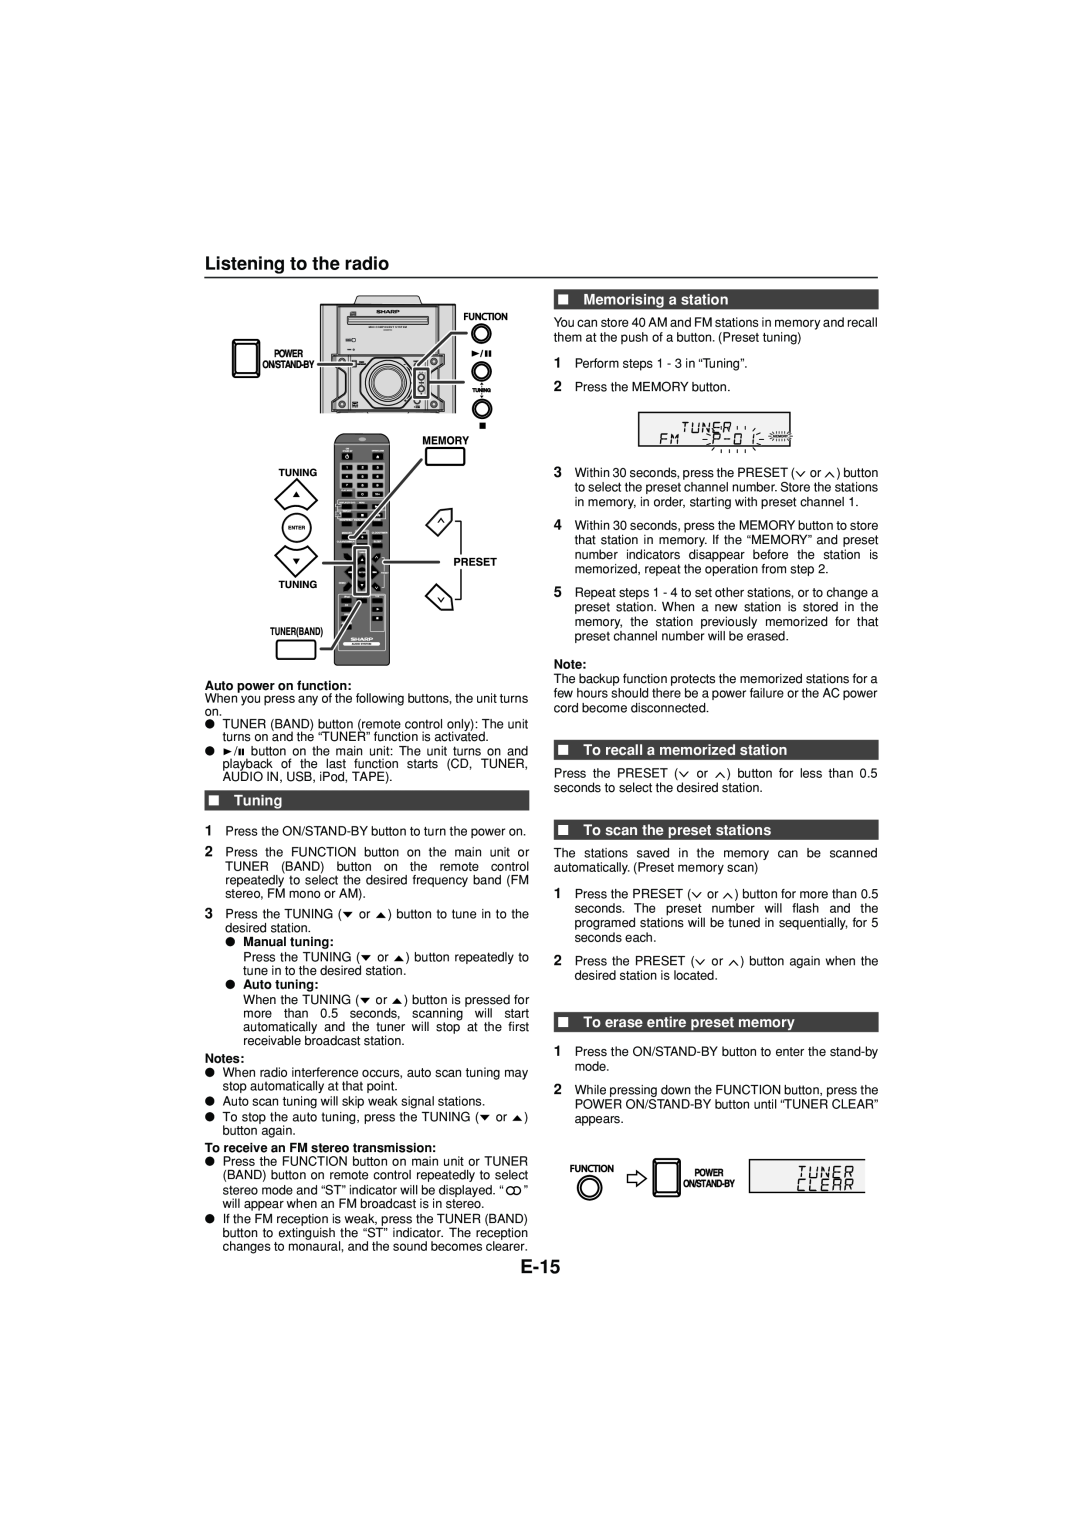 Sony CD-DH790N operation manual E-15, Listening to the radio, Memorising a station, Tuning, To recall a memorized station 